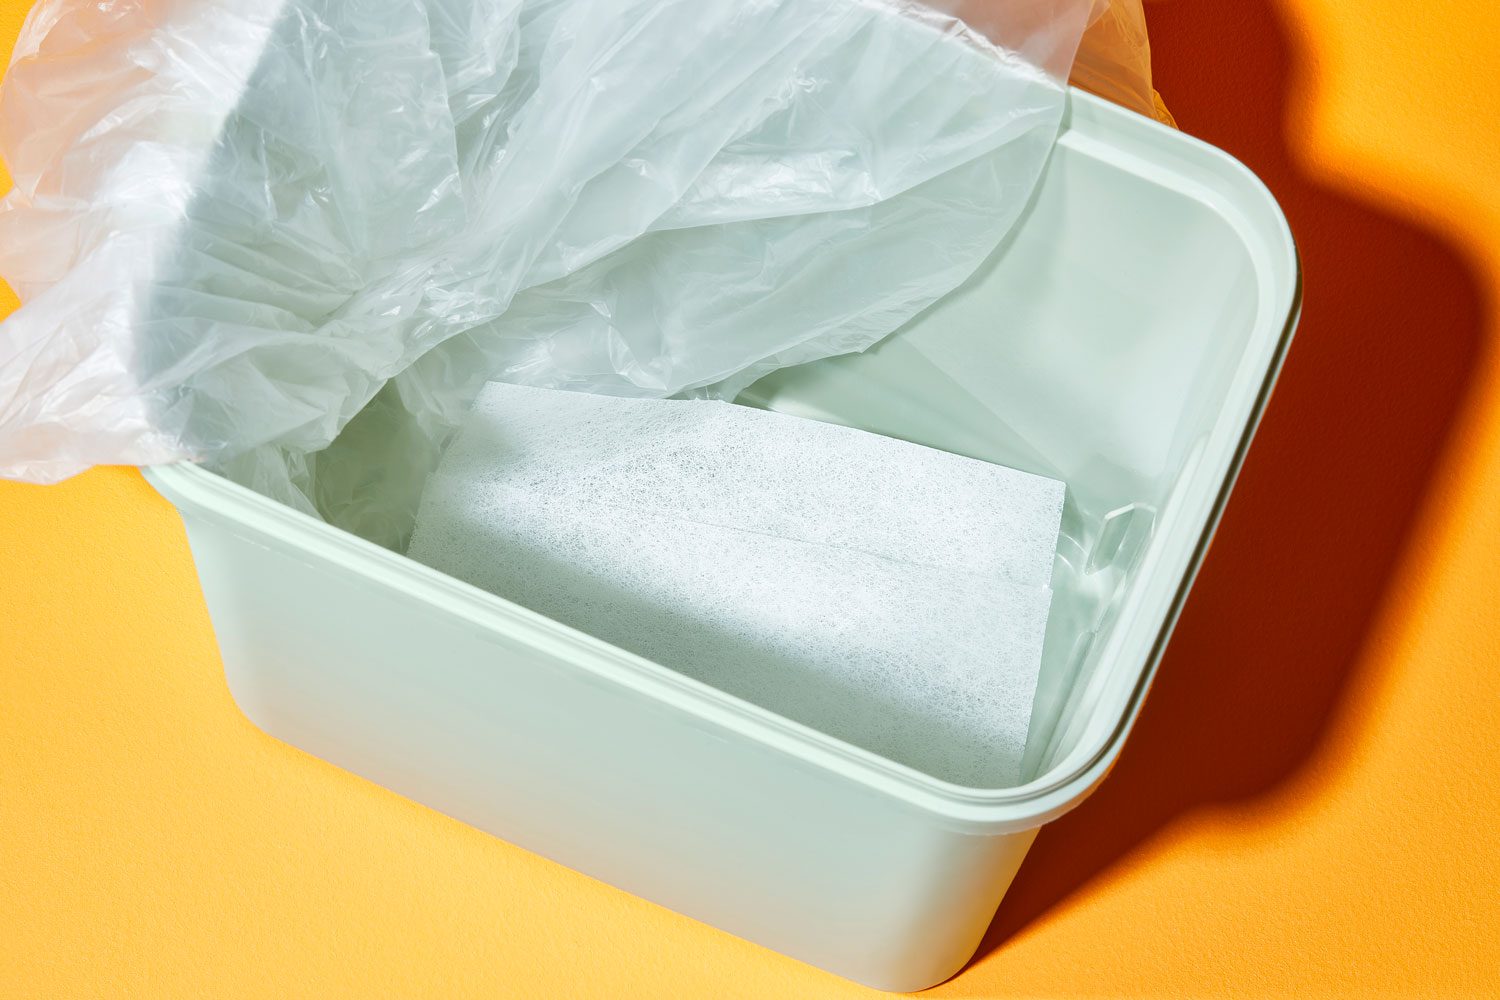 a dryer sheet at the bottom of a trash can with the bag pulled to one side so the dryer sheet can be visible; orange background